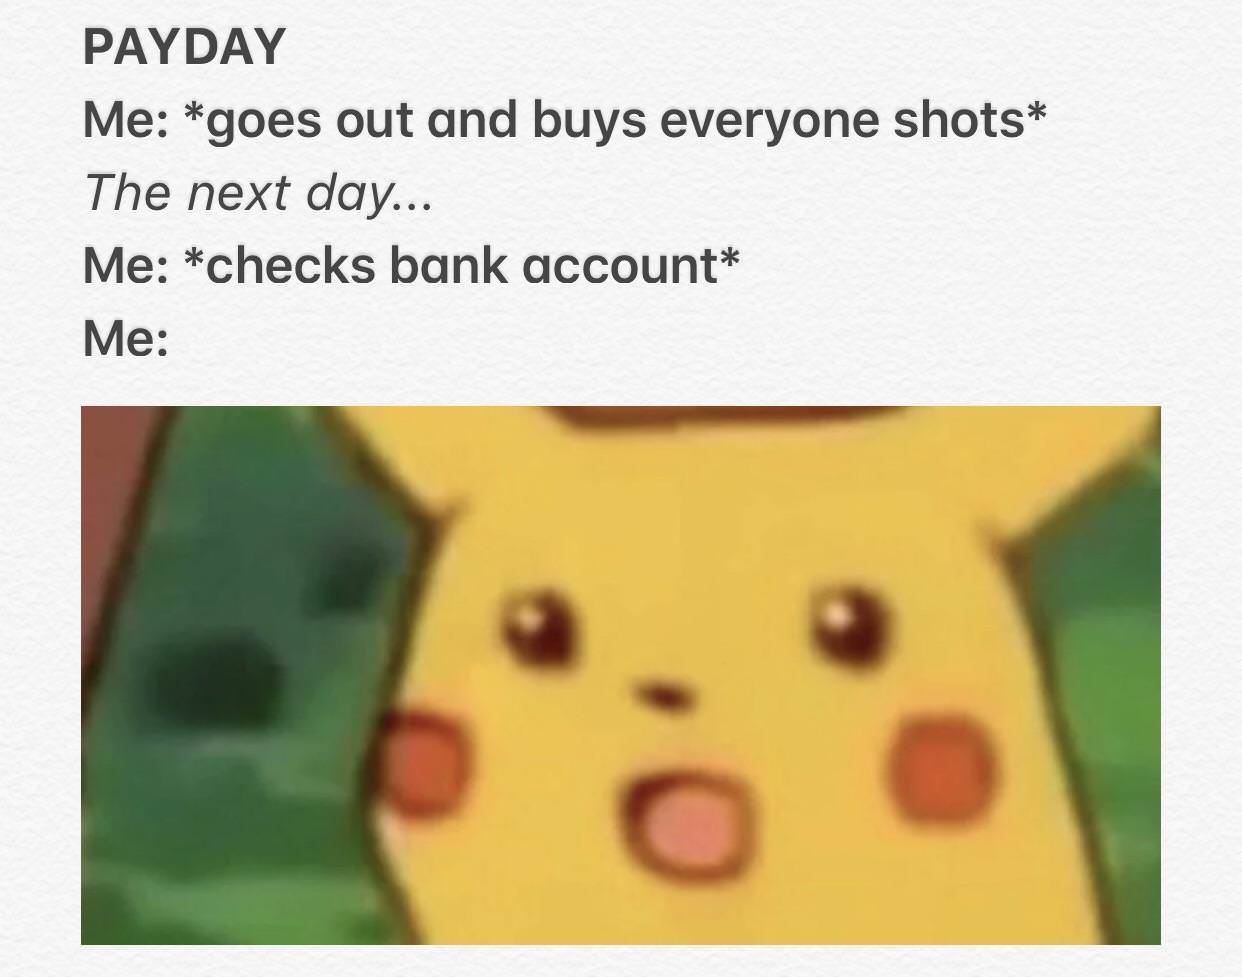 academically challenged pikachu meme - Payday Me goes out and buys everyone shots The next day... Me checks bank account Me